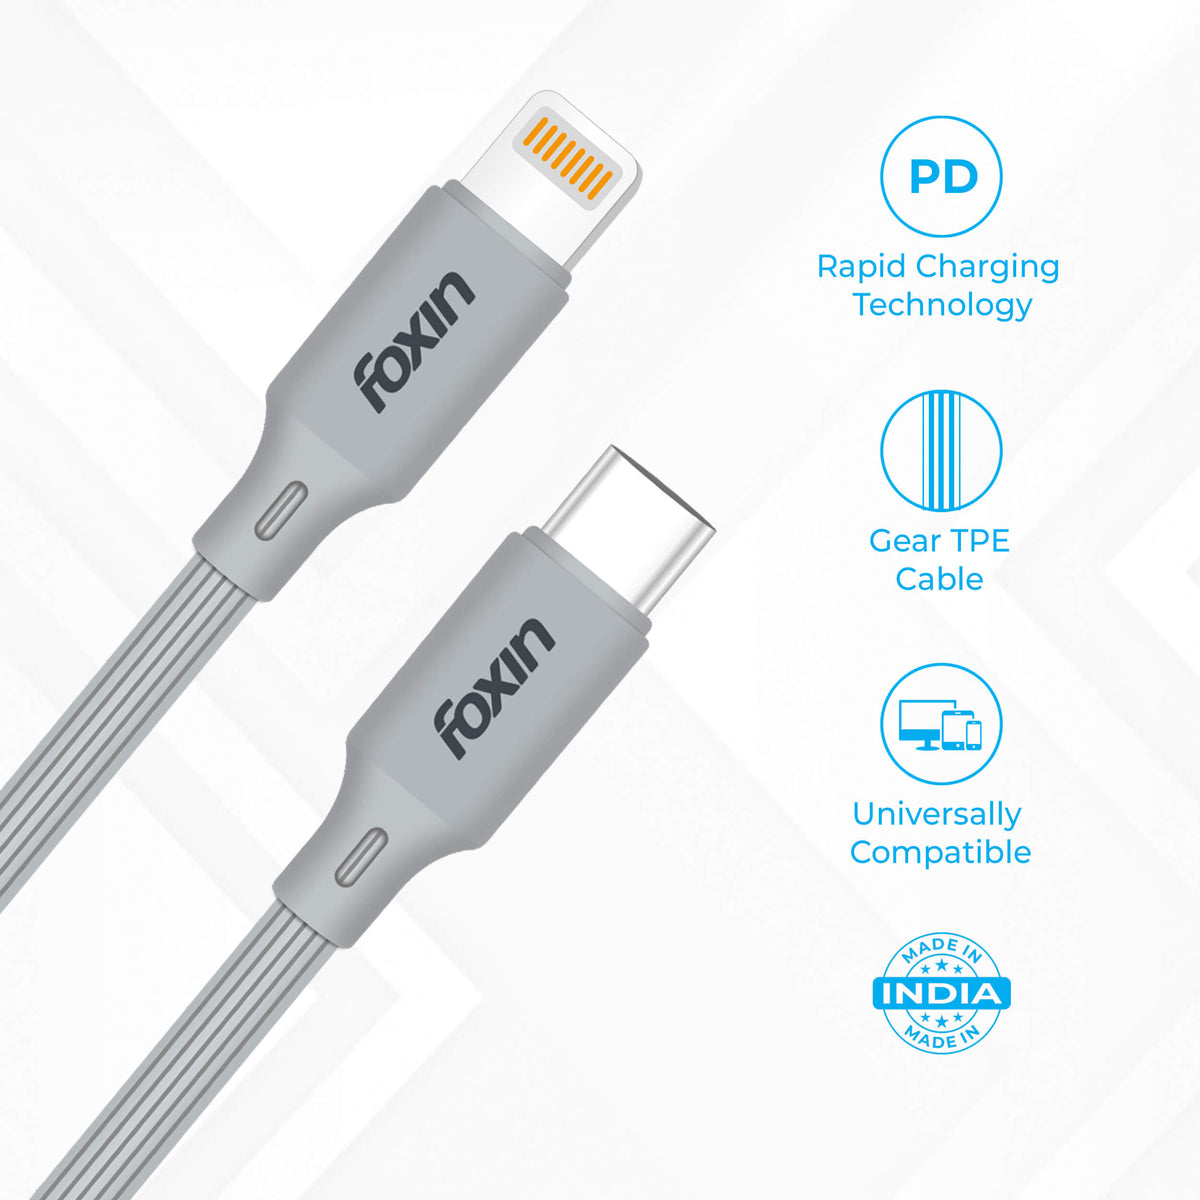 Foxin 20W PD Fast Charging Type-C to Lightning 1.2M Gear Type Durable and Flexible Cable with Rapid Charging Technology, 480 Mbps Data Transmission Speed, Compatible with all 8 Pin Accessories | Grey (FDC-TCA10)